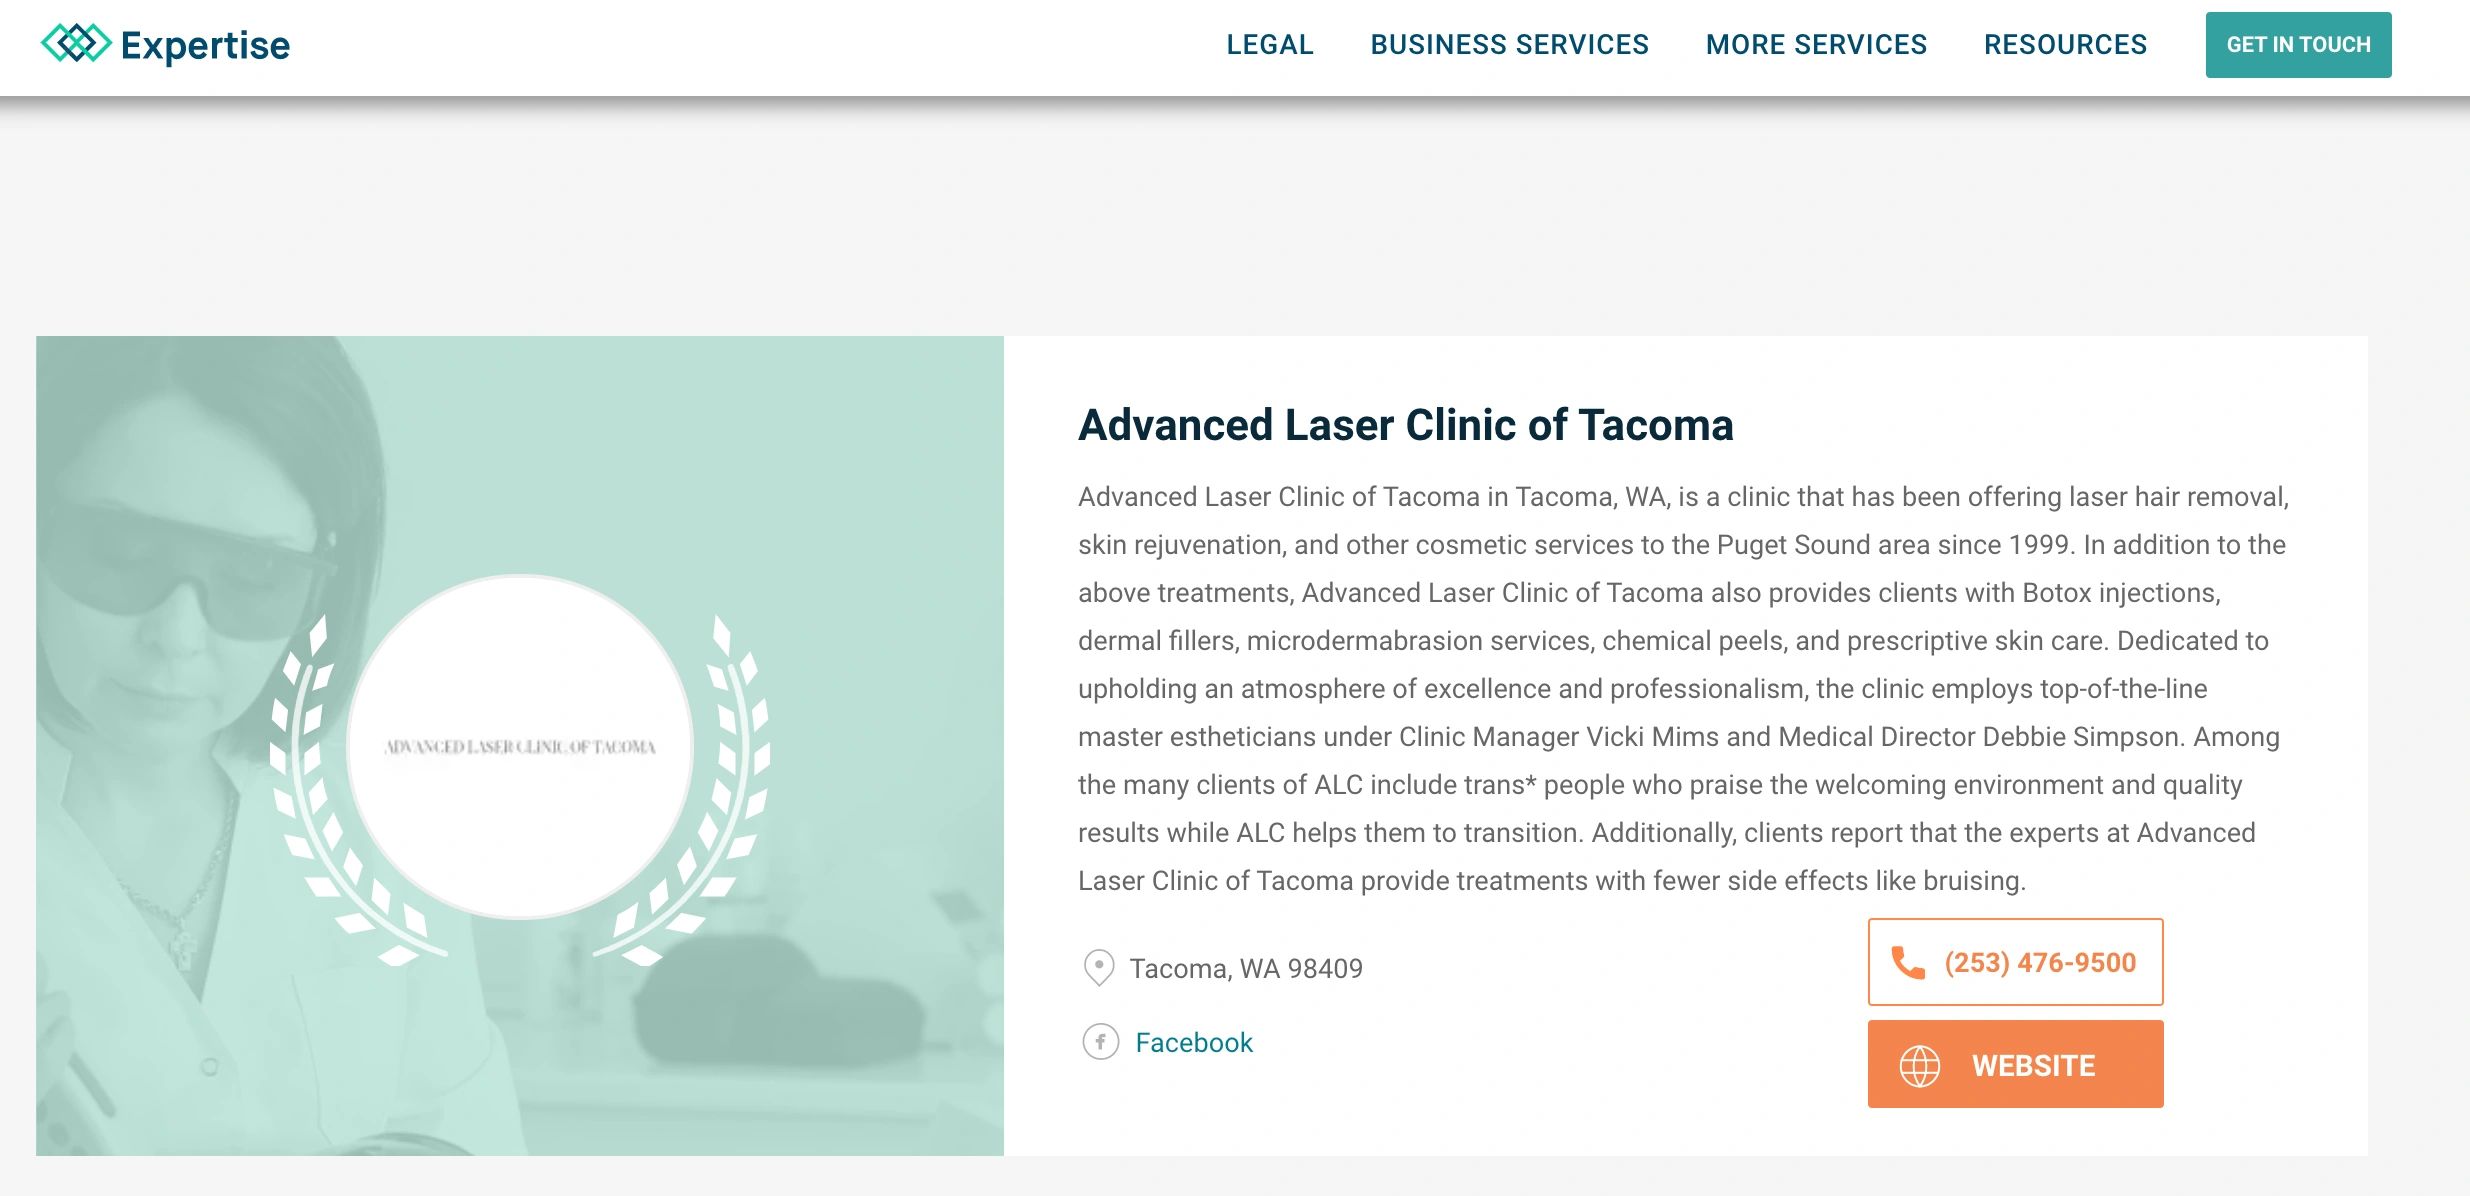 Expertise Review of Advanced Laser Clinic of Tacoma.